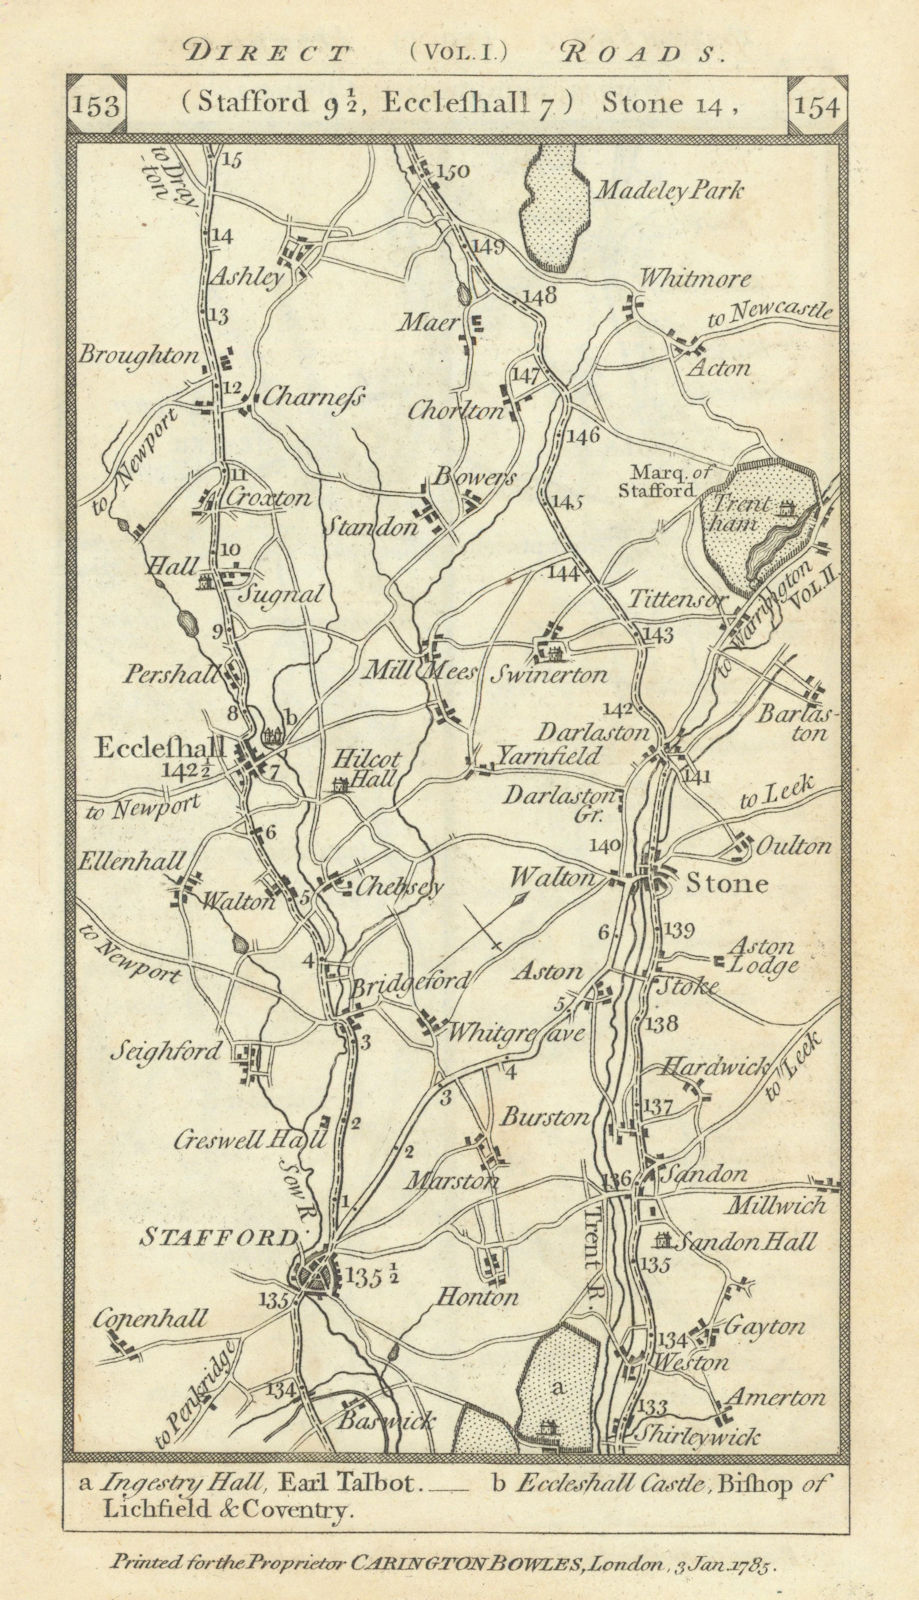 Stafford - Stone - Eccleshall road strip map PATERSON 1785 old antique